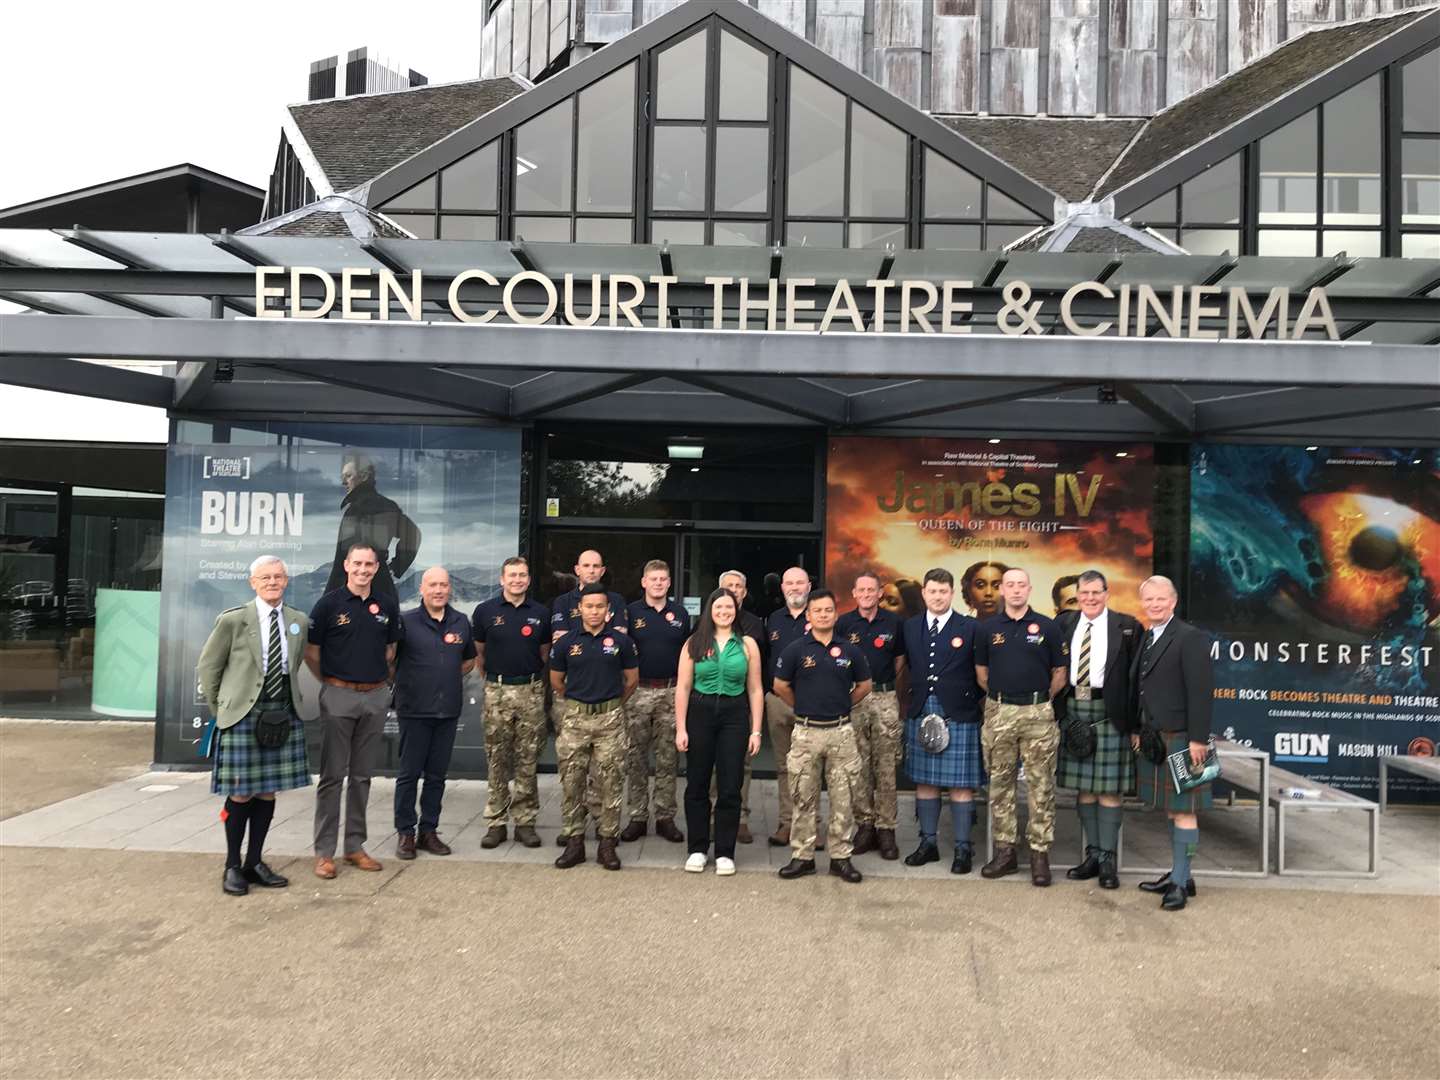 Alan Forbes, Convener of the Northern Meeting Piping Competitions( left of picture) and Bruce Hitchings and Derek Fraser, respective judge and official, with members of the Army School of Piping and Highland Drumming who are acting as stewards for the competitions.